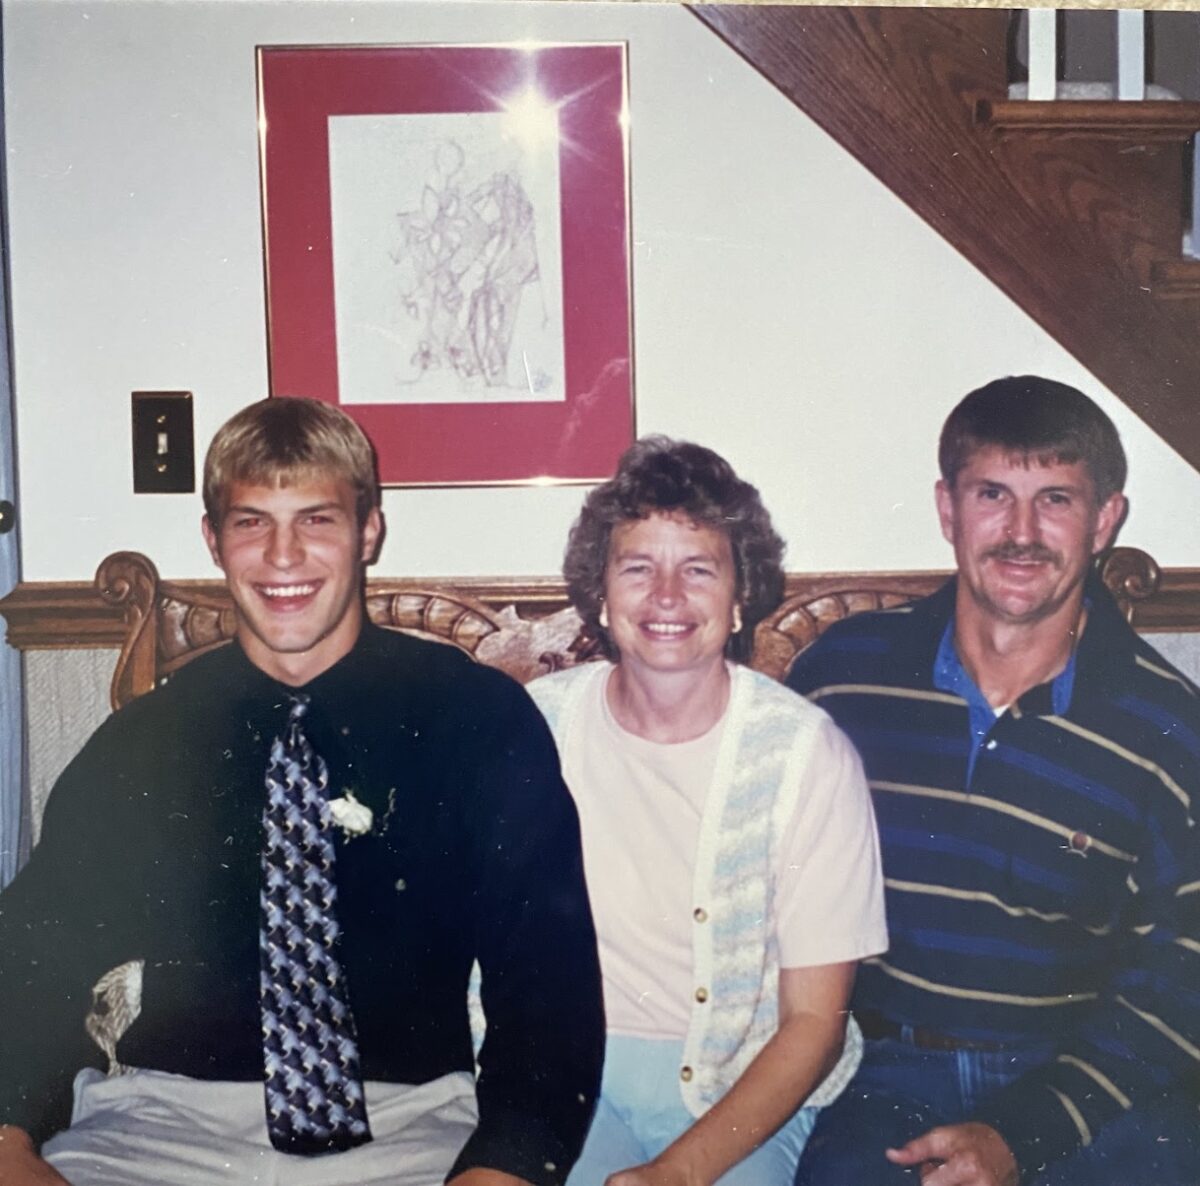 Jesus Calling podcast 406 featuring Dr. Josh Axe -shown here is a young Axe with his parents